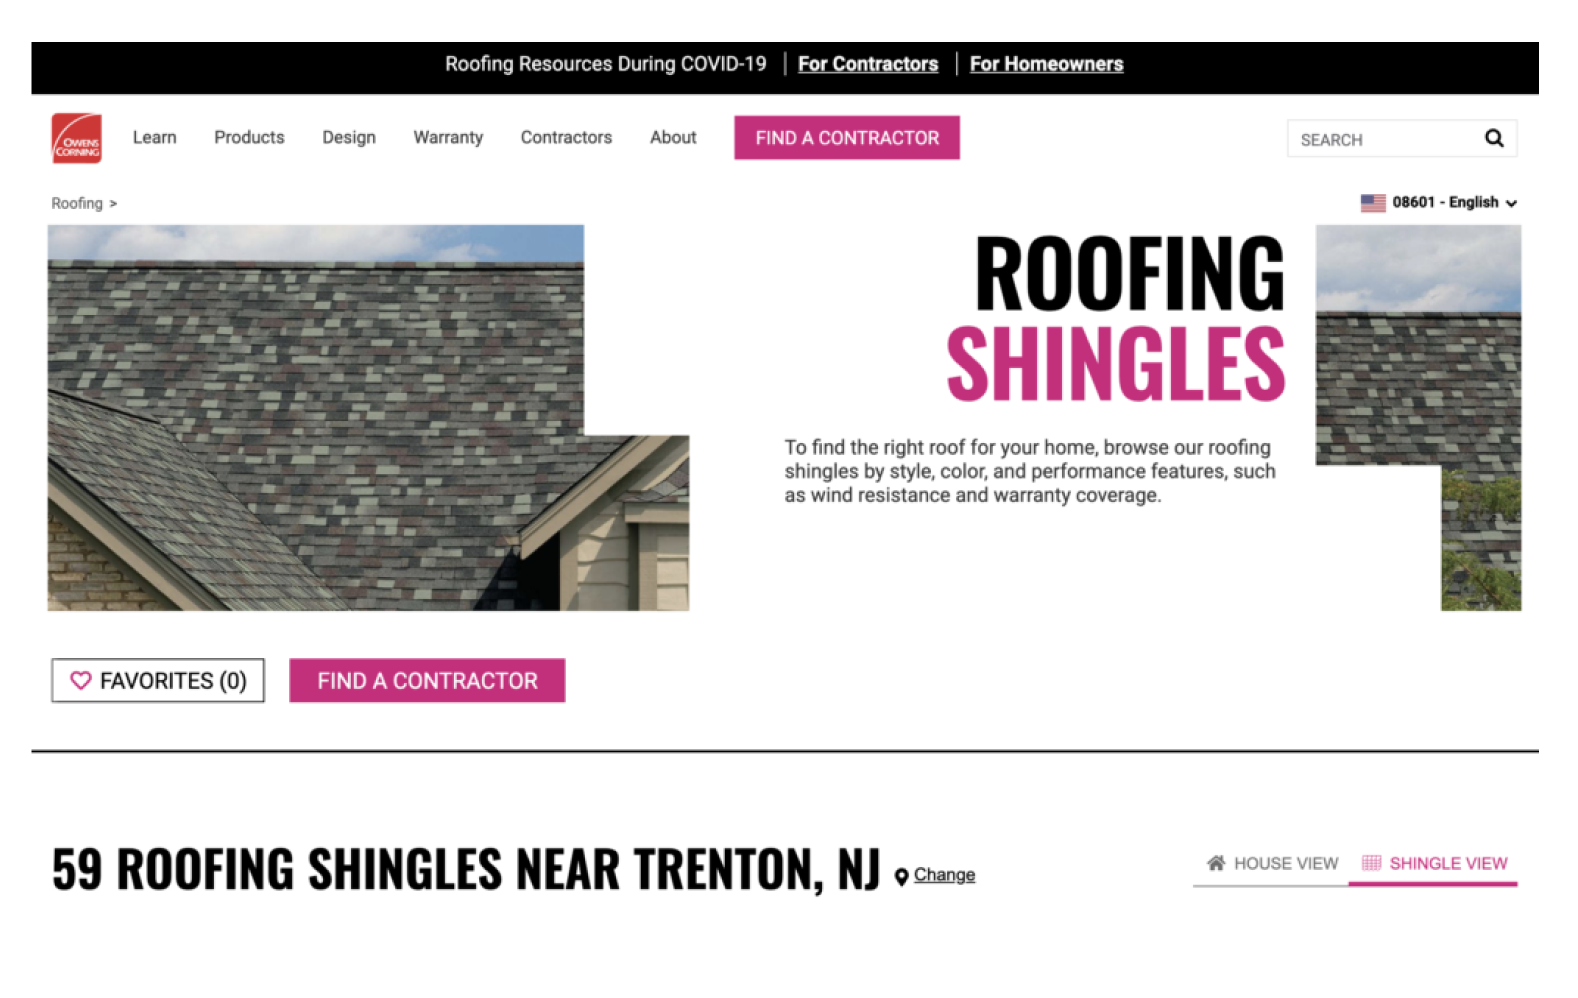 Our roofing company in Hamilton NJ serves all central NJ and provides quality roofing installations, replacements, and roof repairs using materials from companies like Owens Corning.